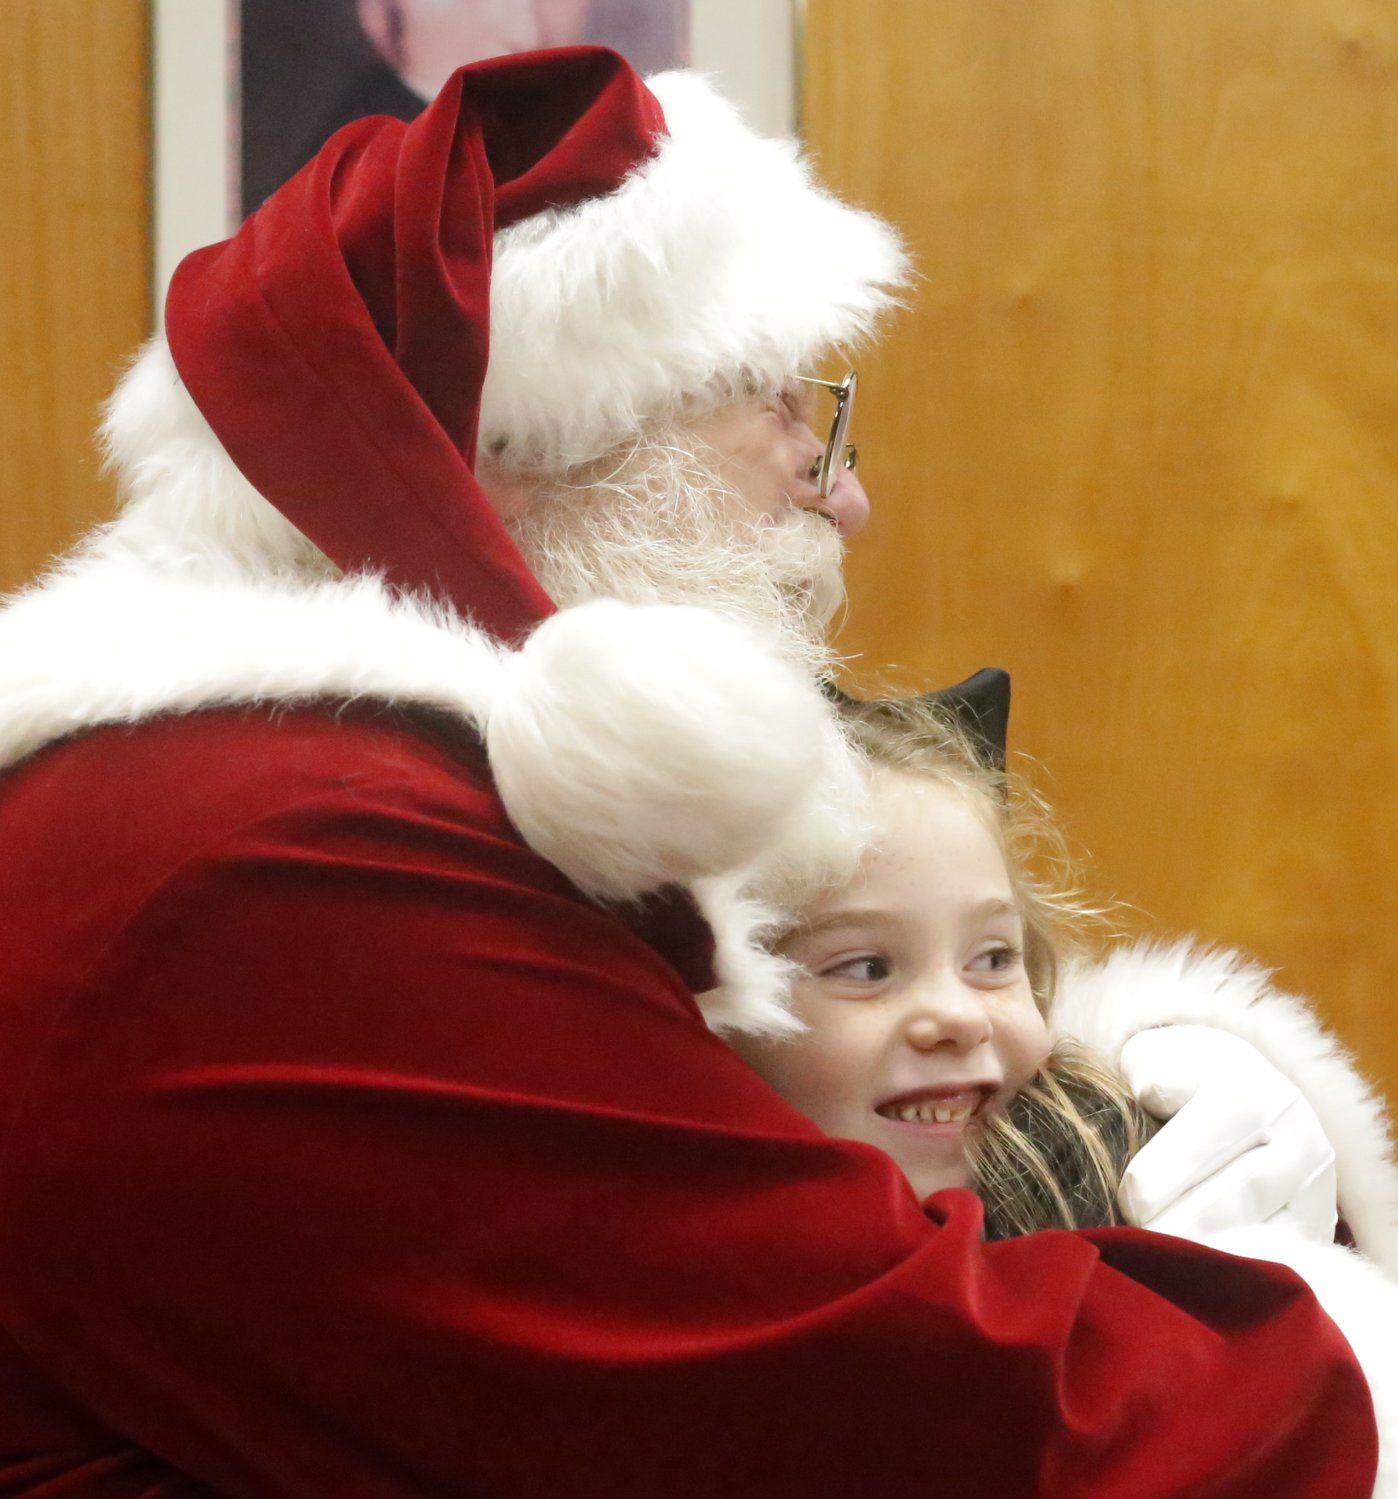 One of Santa’s visitors at the Mineola library got a hug from the Christmas icon after sharing her wishes.